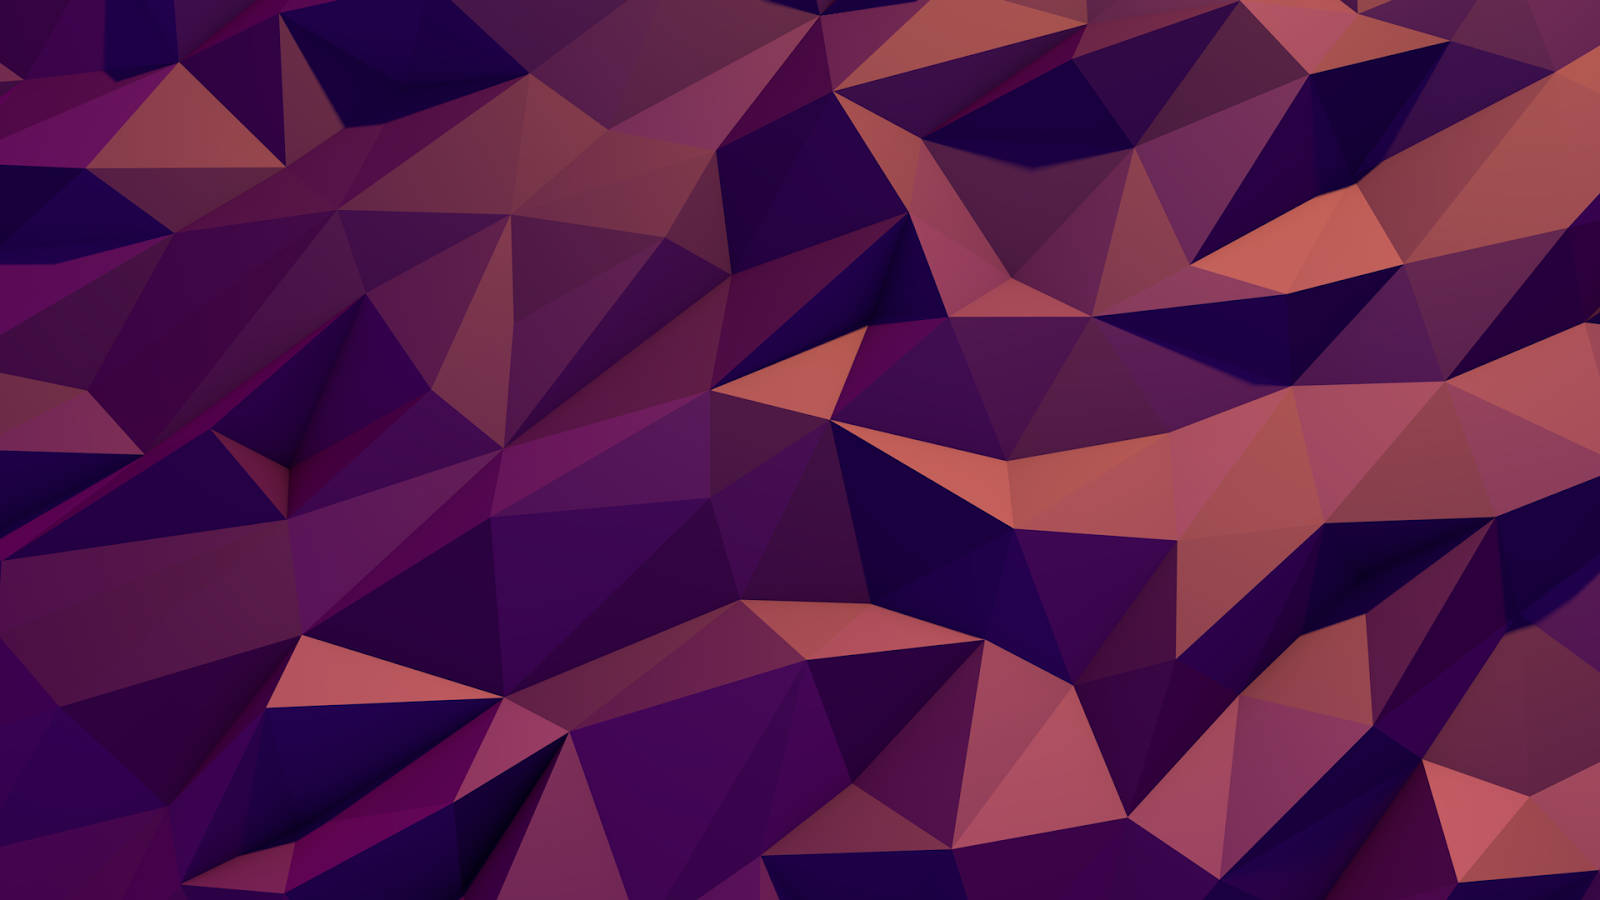 Low Poly Abstract Art Wallpaper